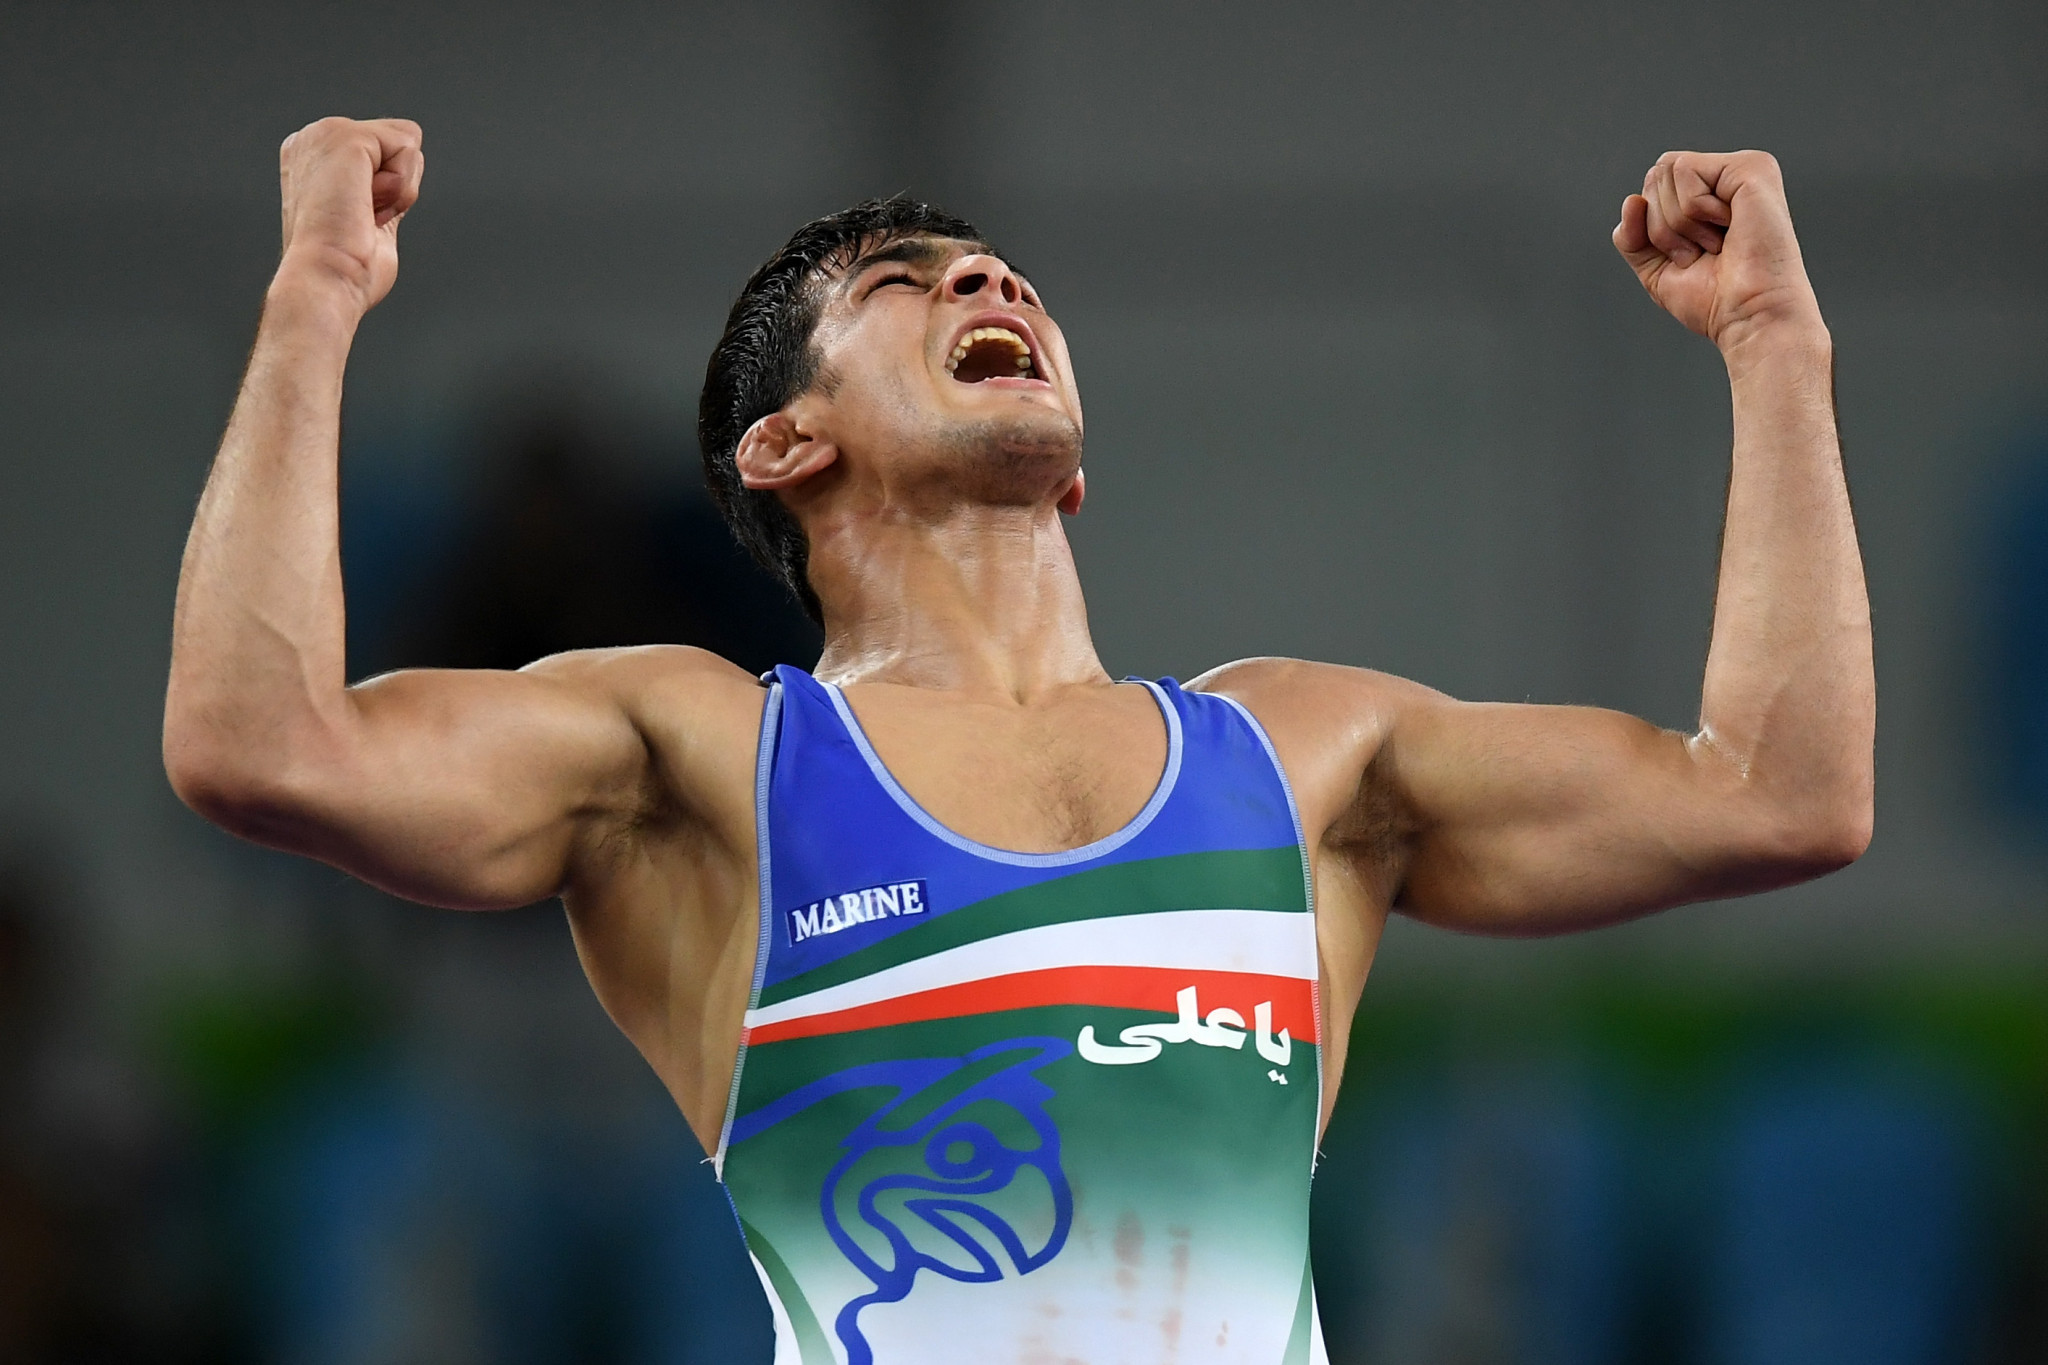 Hassan Yazdani claimed gold on the final day of the Asian Wrestling Championships ©Getty Images